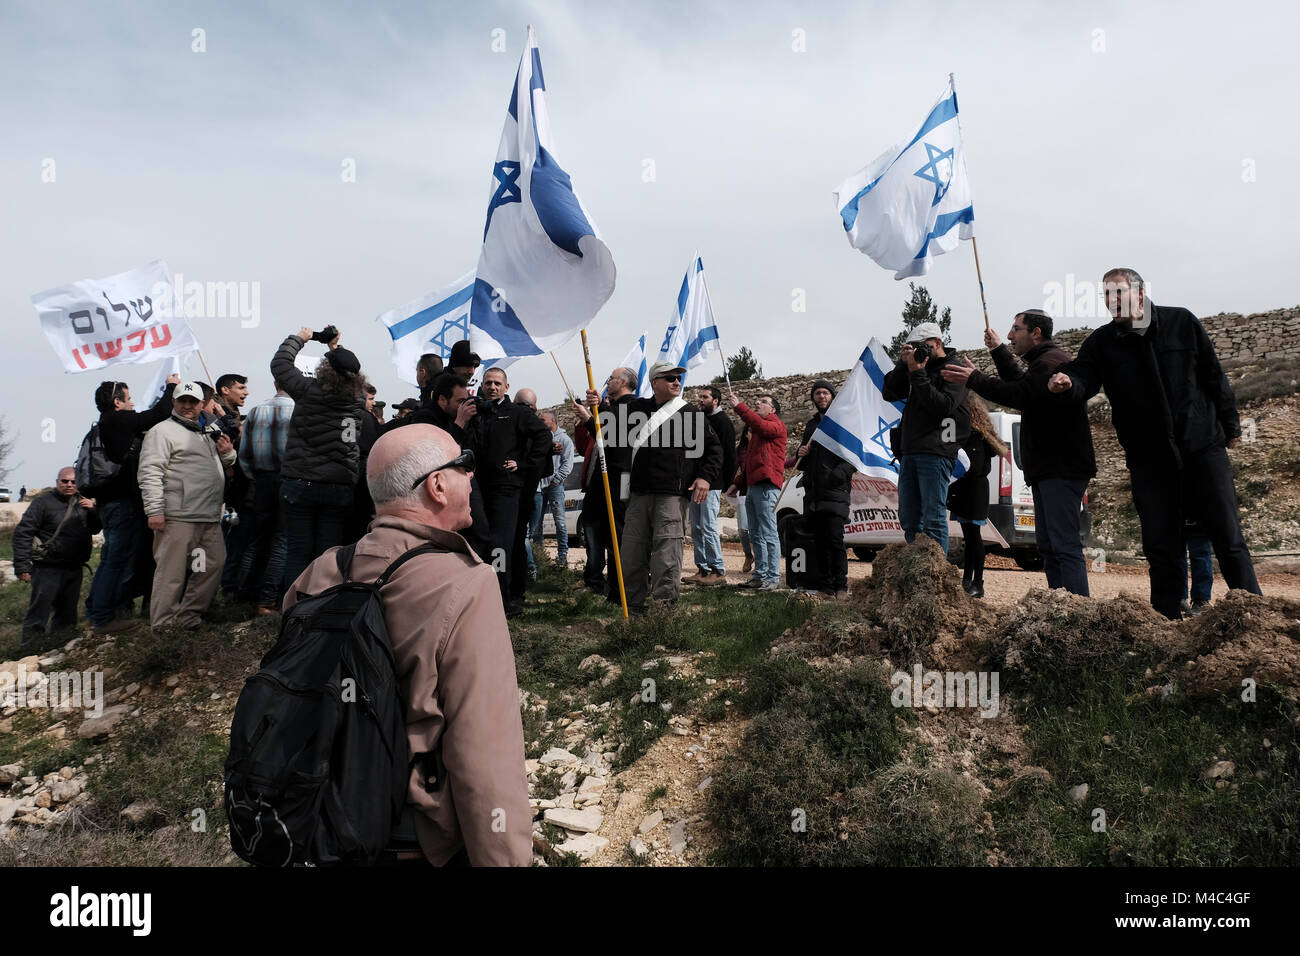 Nativ Ha'avot, Israel. 15th Feb, 2018. Jewish settlers and activists from the right wing Zionist organization Im Tirtzu confronting members of the left-wing Peace Now movement protesting next to the illegal outpost of Nativ Ha'avot on following Israeli government attempts to postpone the removal of some of the houses in the outpost despite the Supreme Court ruling after accepting the petition of a group of Palestinians who argued the homes had been partially built illegally on their land. Credit: Eddie Gerald/Alamy Live News Stock Photo